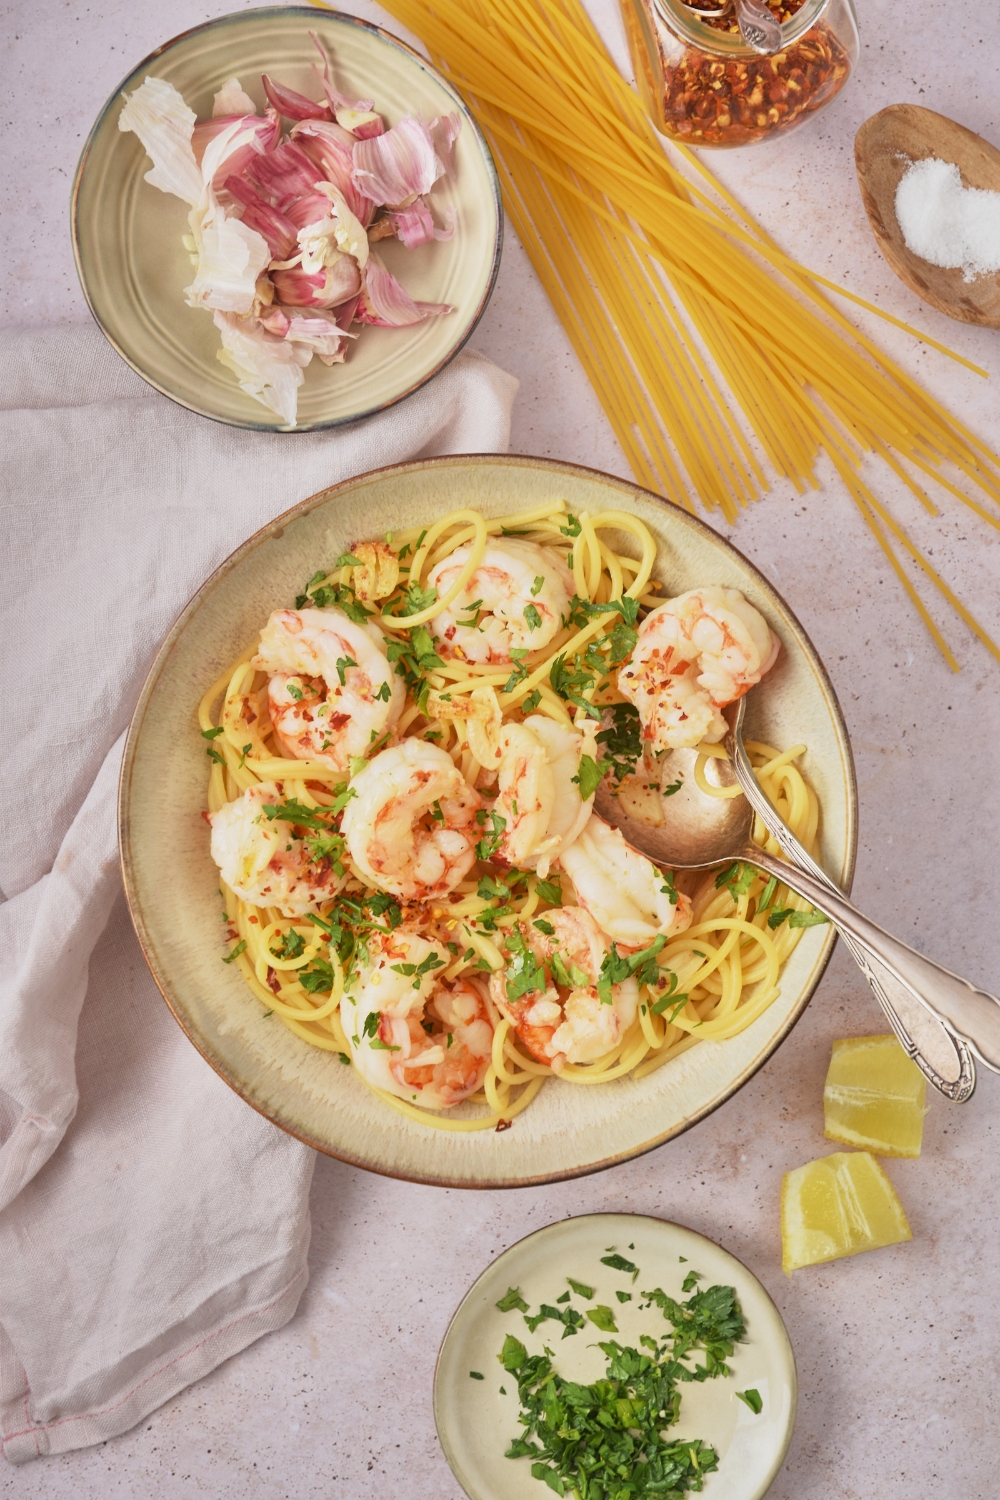 Overhead view of a bowl of shrimp spaghetti garnished with fresh green herbs. There is a spoon and fork in the bowl and the bowl is surrounded by raw ingredients.